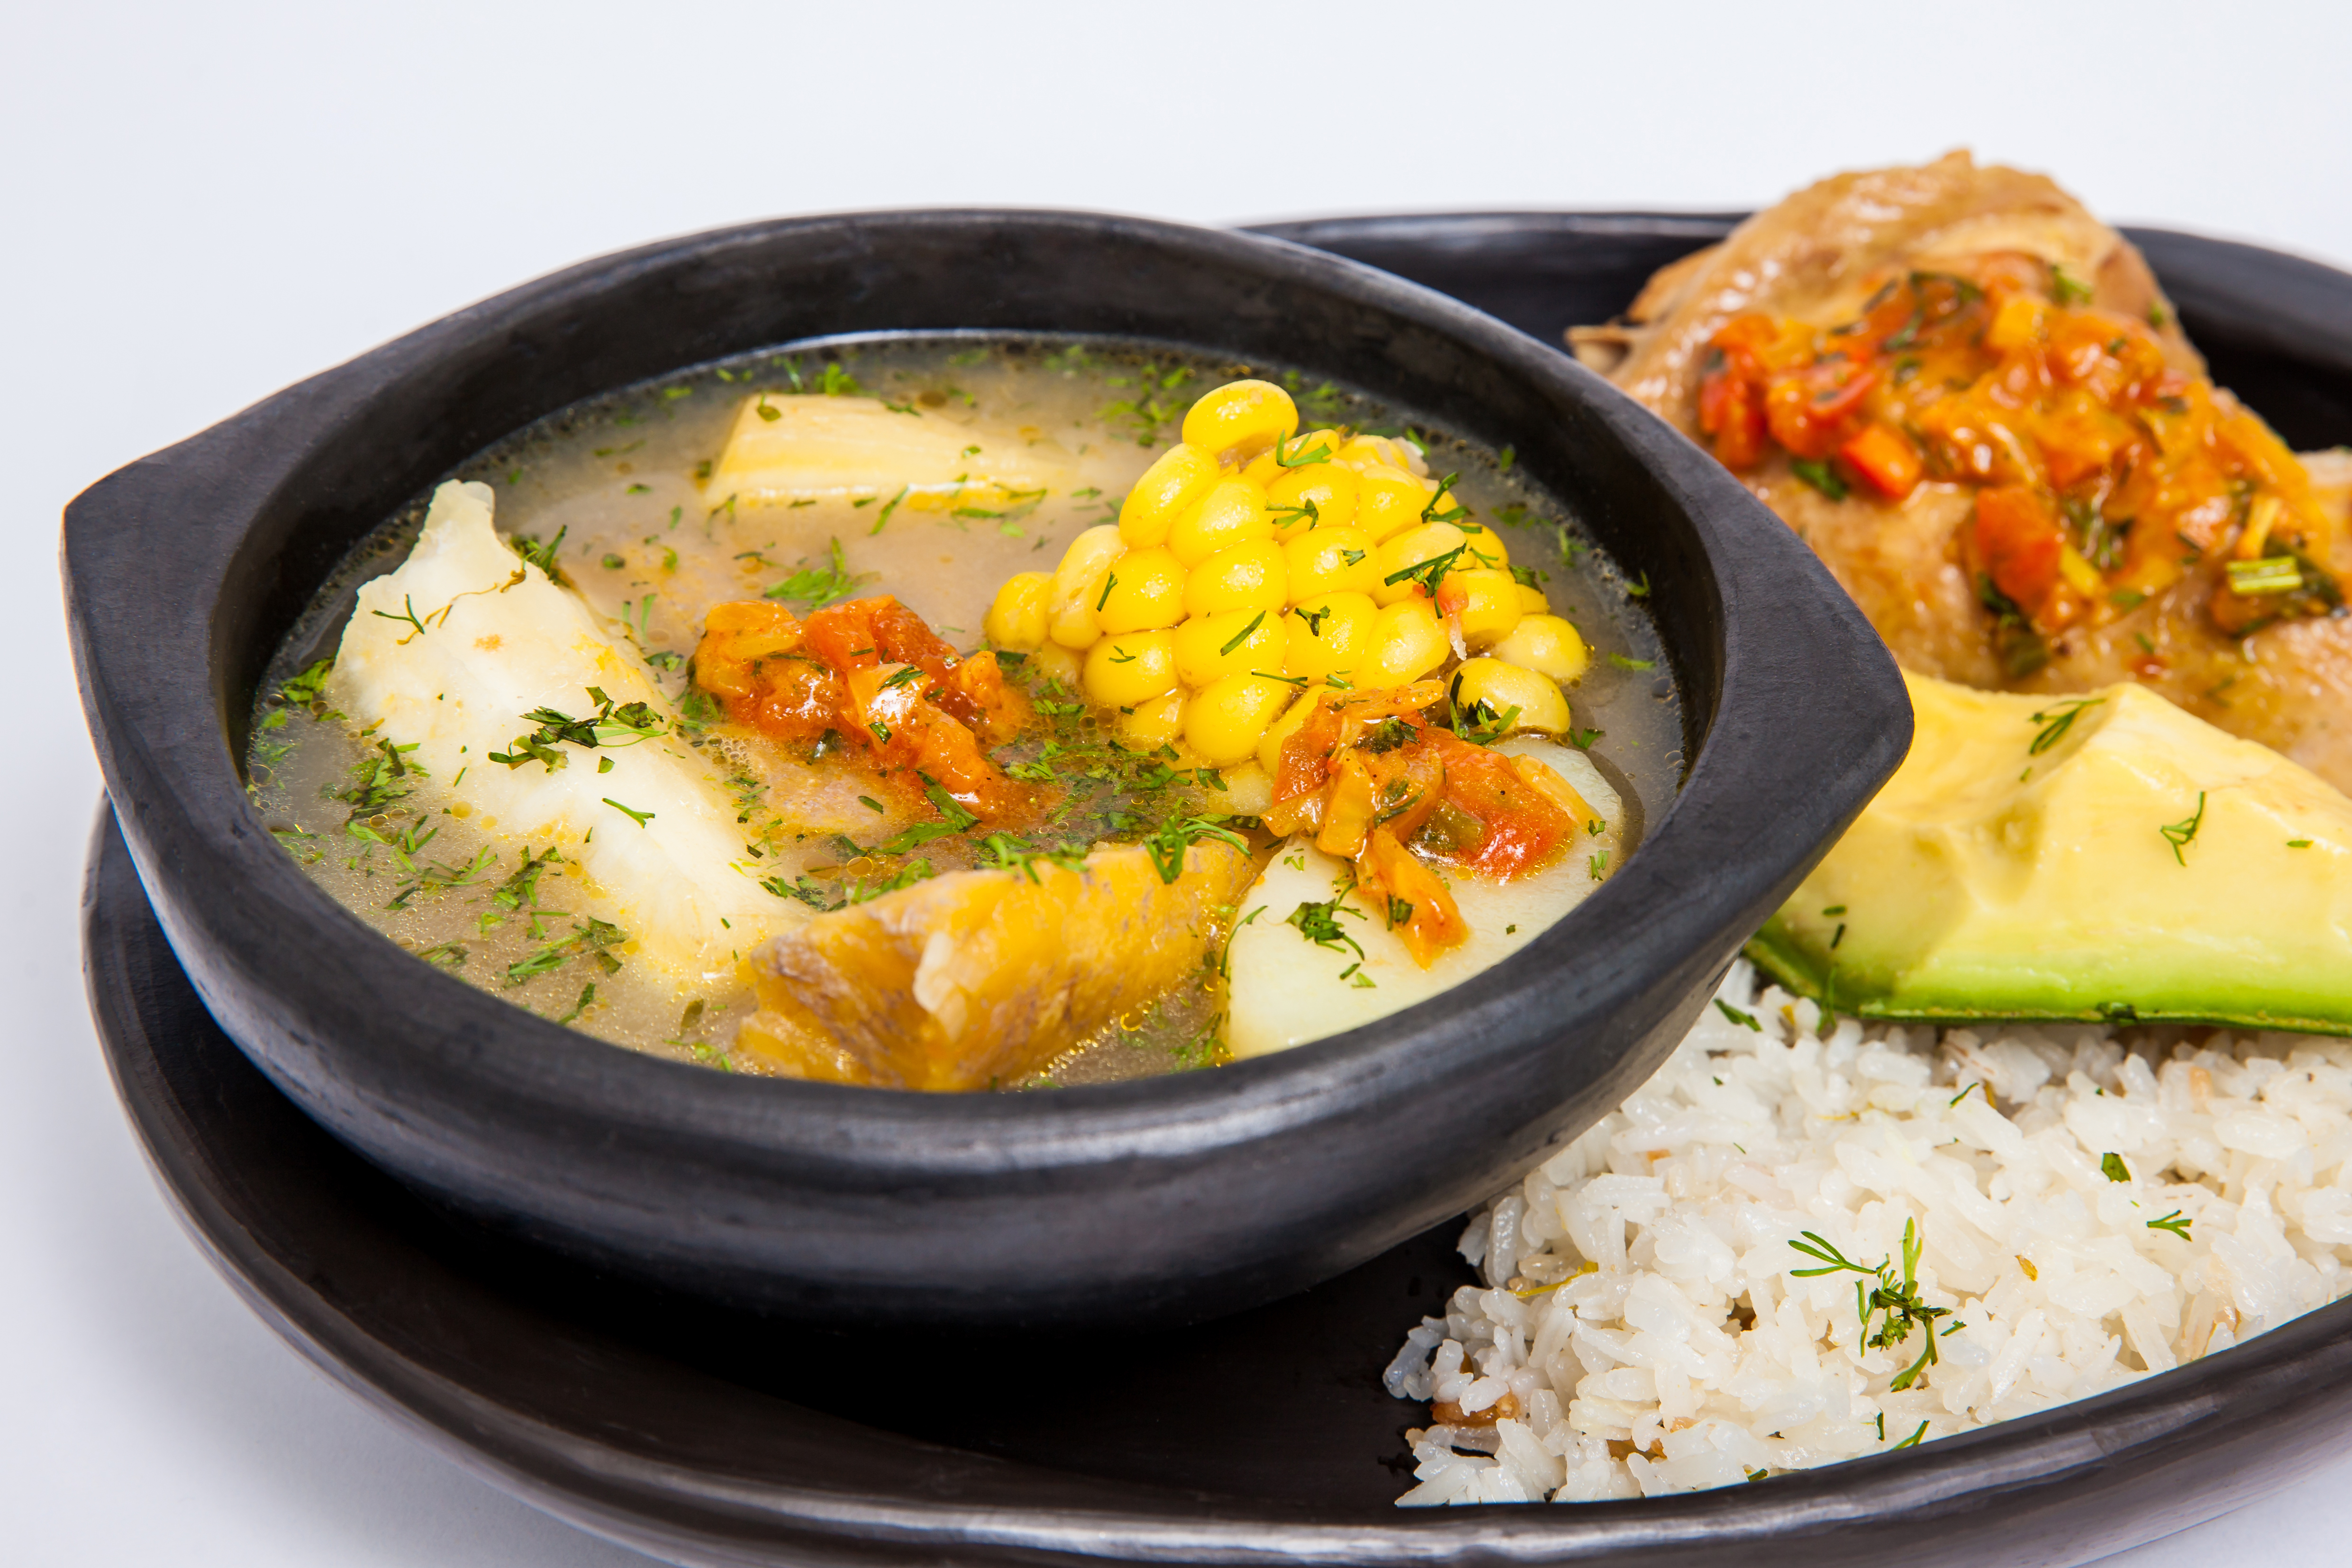 Traditional Colombian soup from the region of Valle del Cauca called sancocho isolated on white background